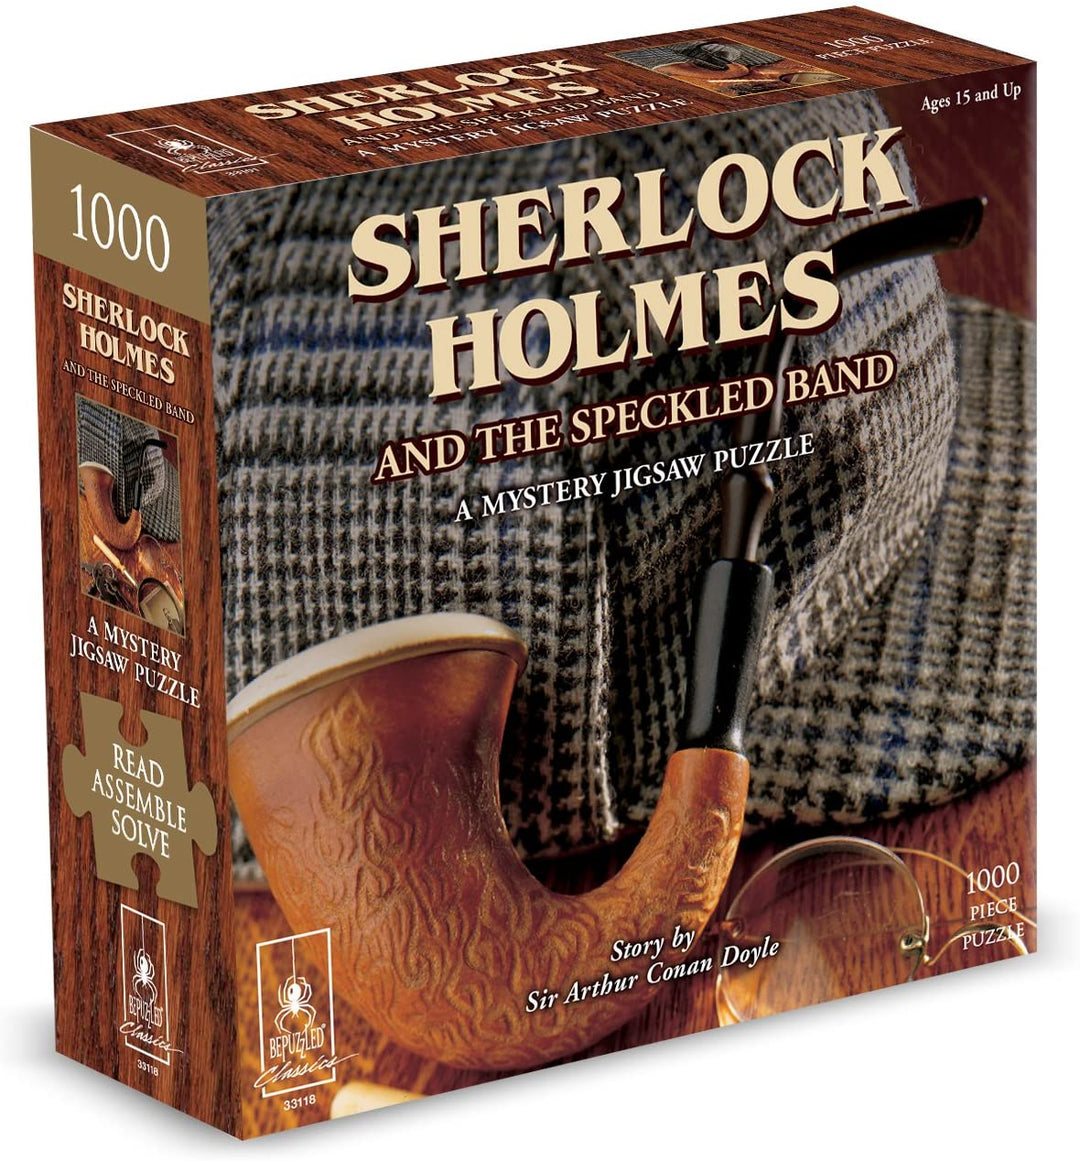 University Games Games Classic Mystery Jigsaw Puzzles Sherlock Holmes 1000pc